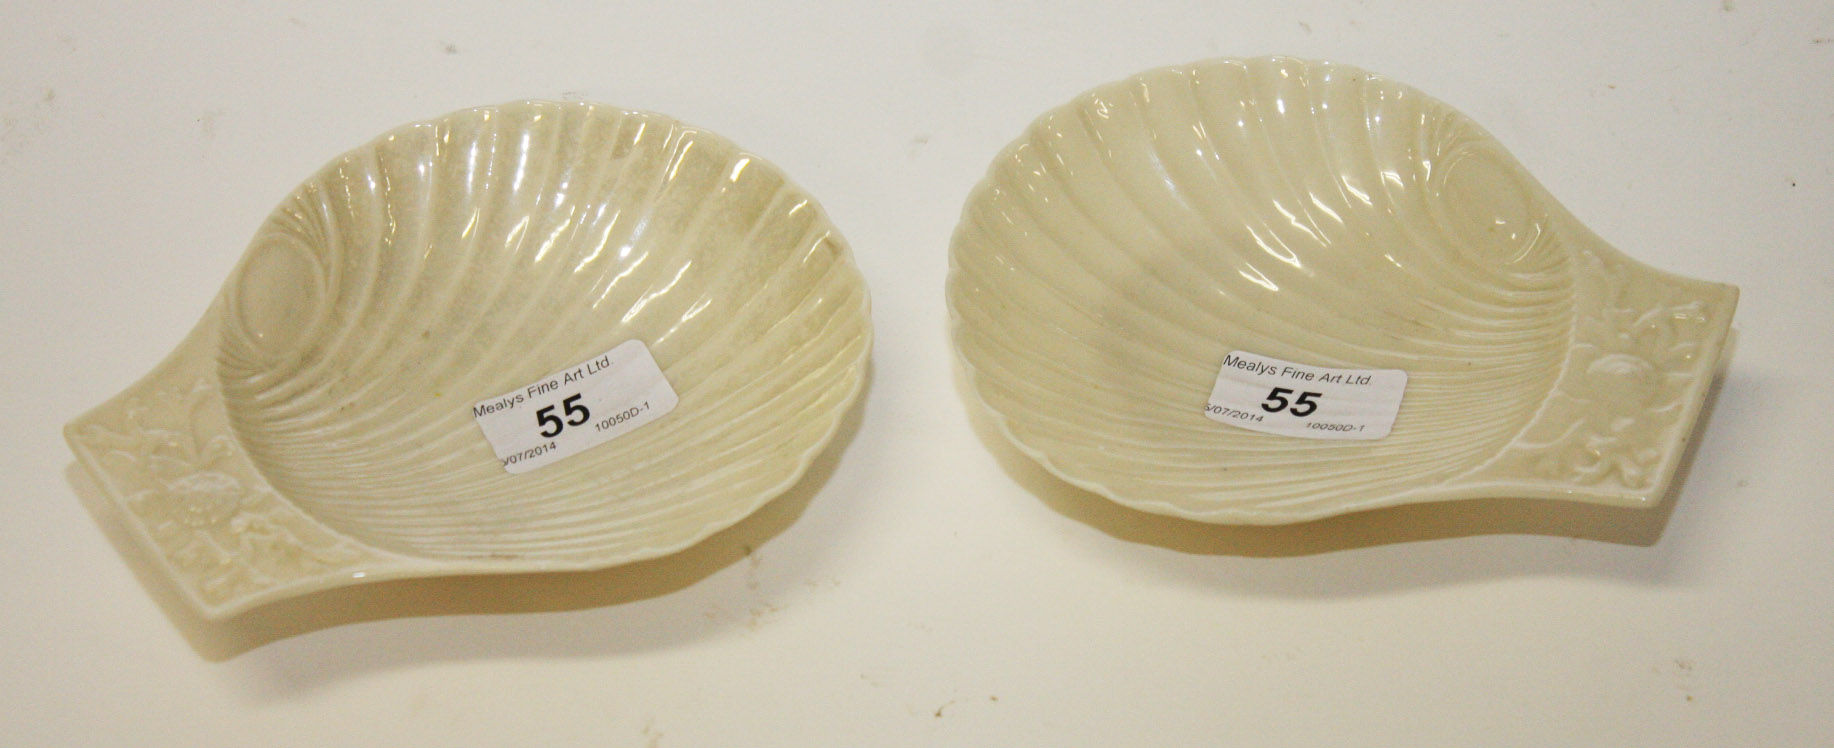 A PAIR OF BELLEEK SCALLOP SHELL BUTTER DISHES,
first period (1863-1890), 6" (15cm). (1).